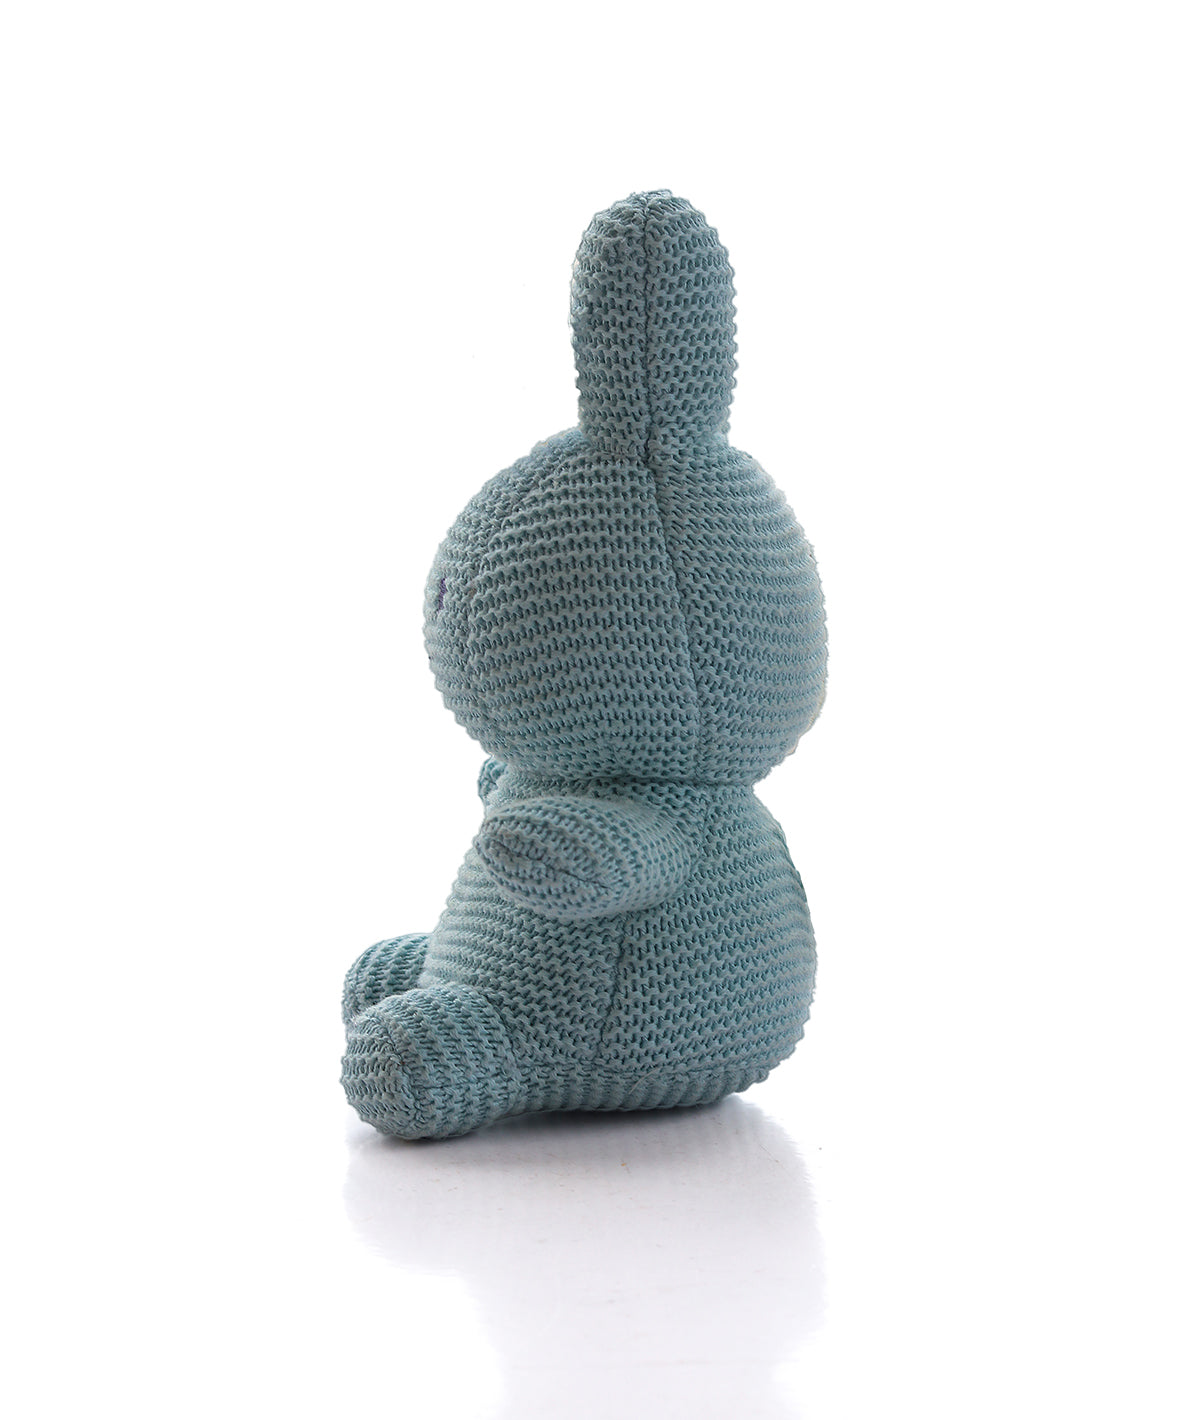 Peter Bunny Cotton Knitted Stuffed Soft Toy for Babies & Kids (Sky Blue)